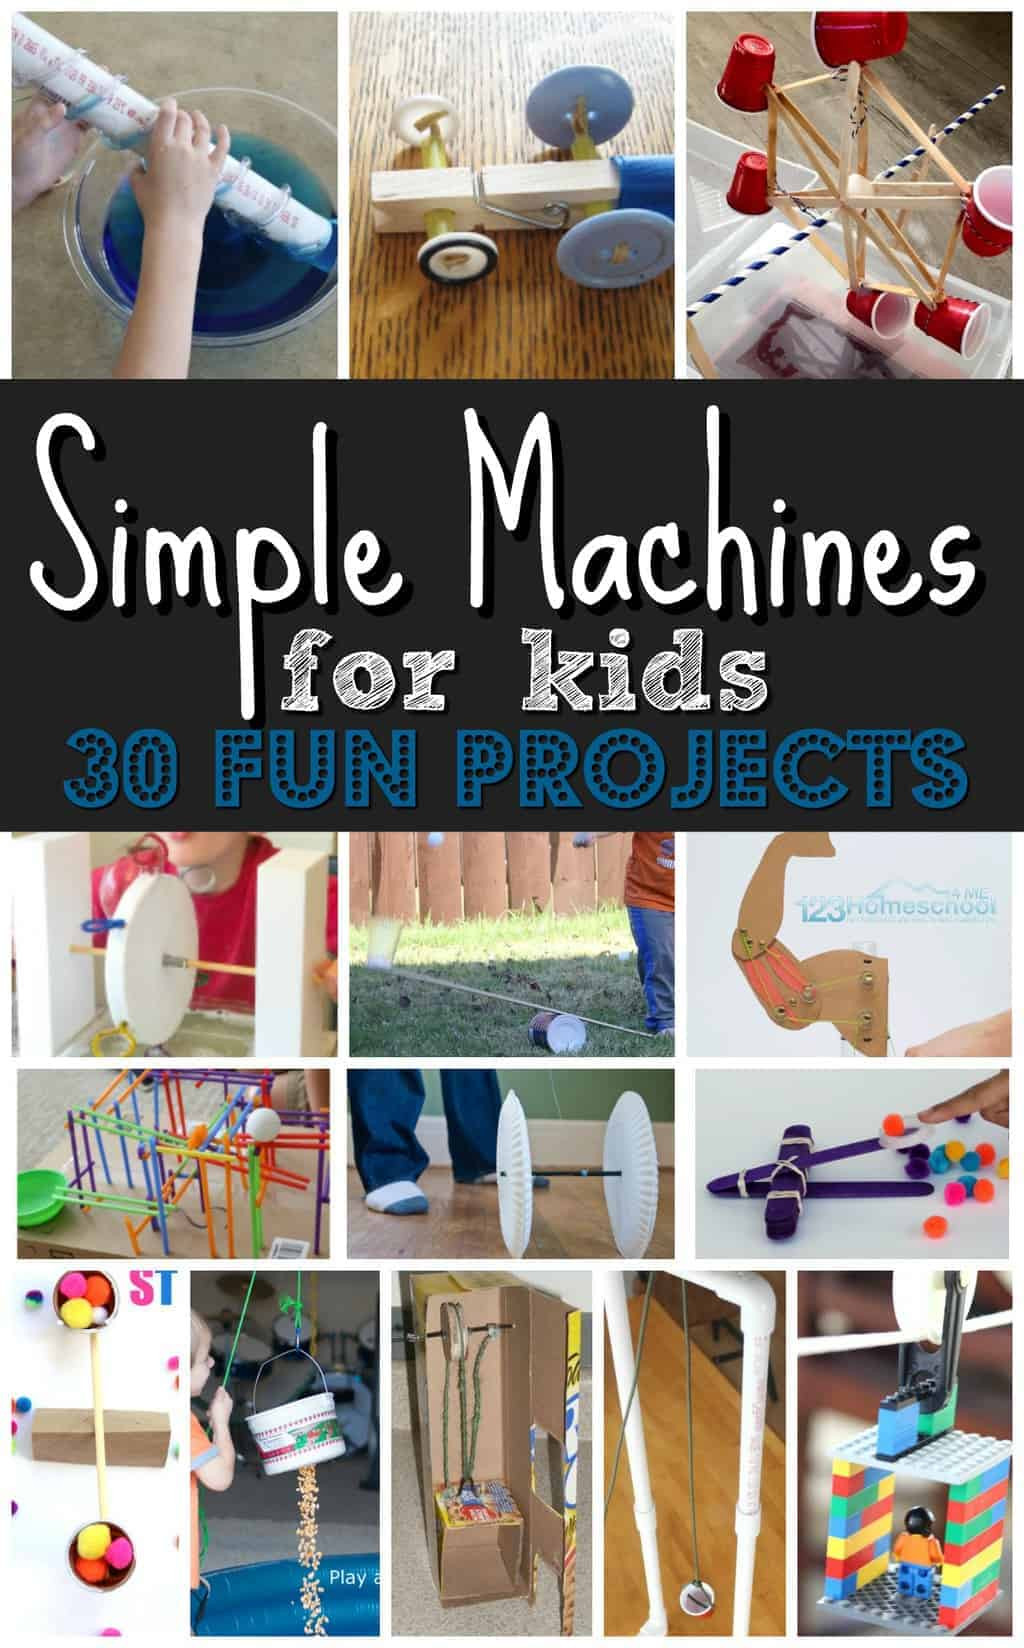 Simple Activities For Kids
 30 Simple Machine Projects for Kids